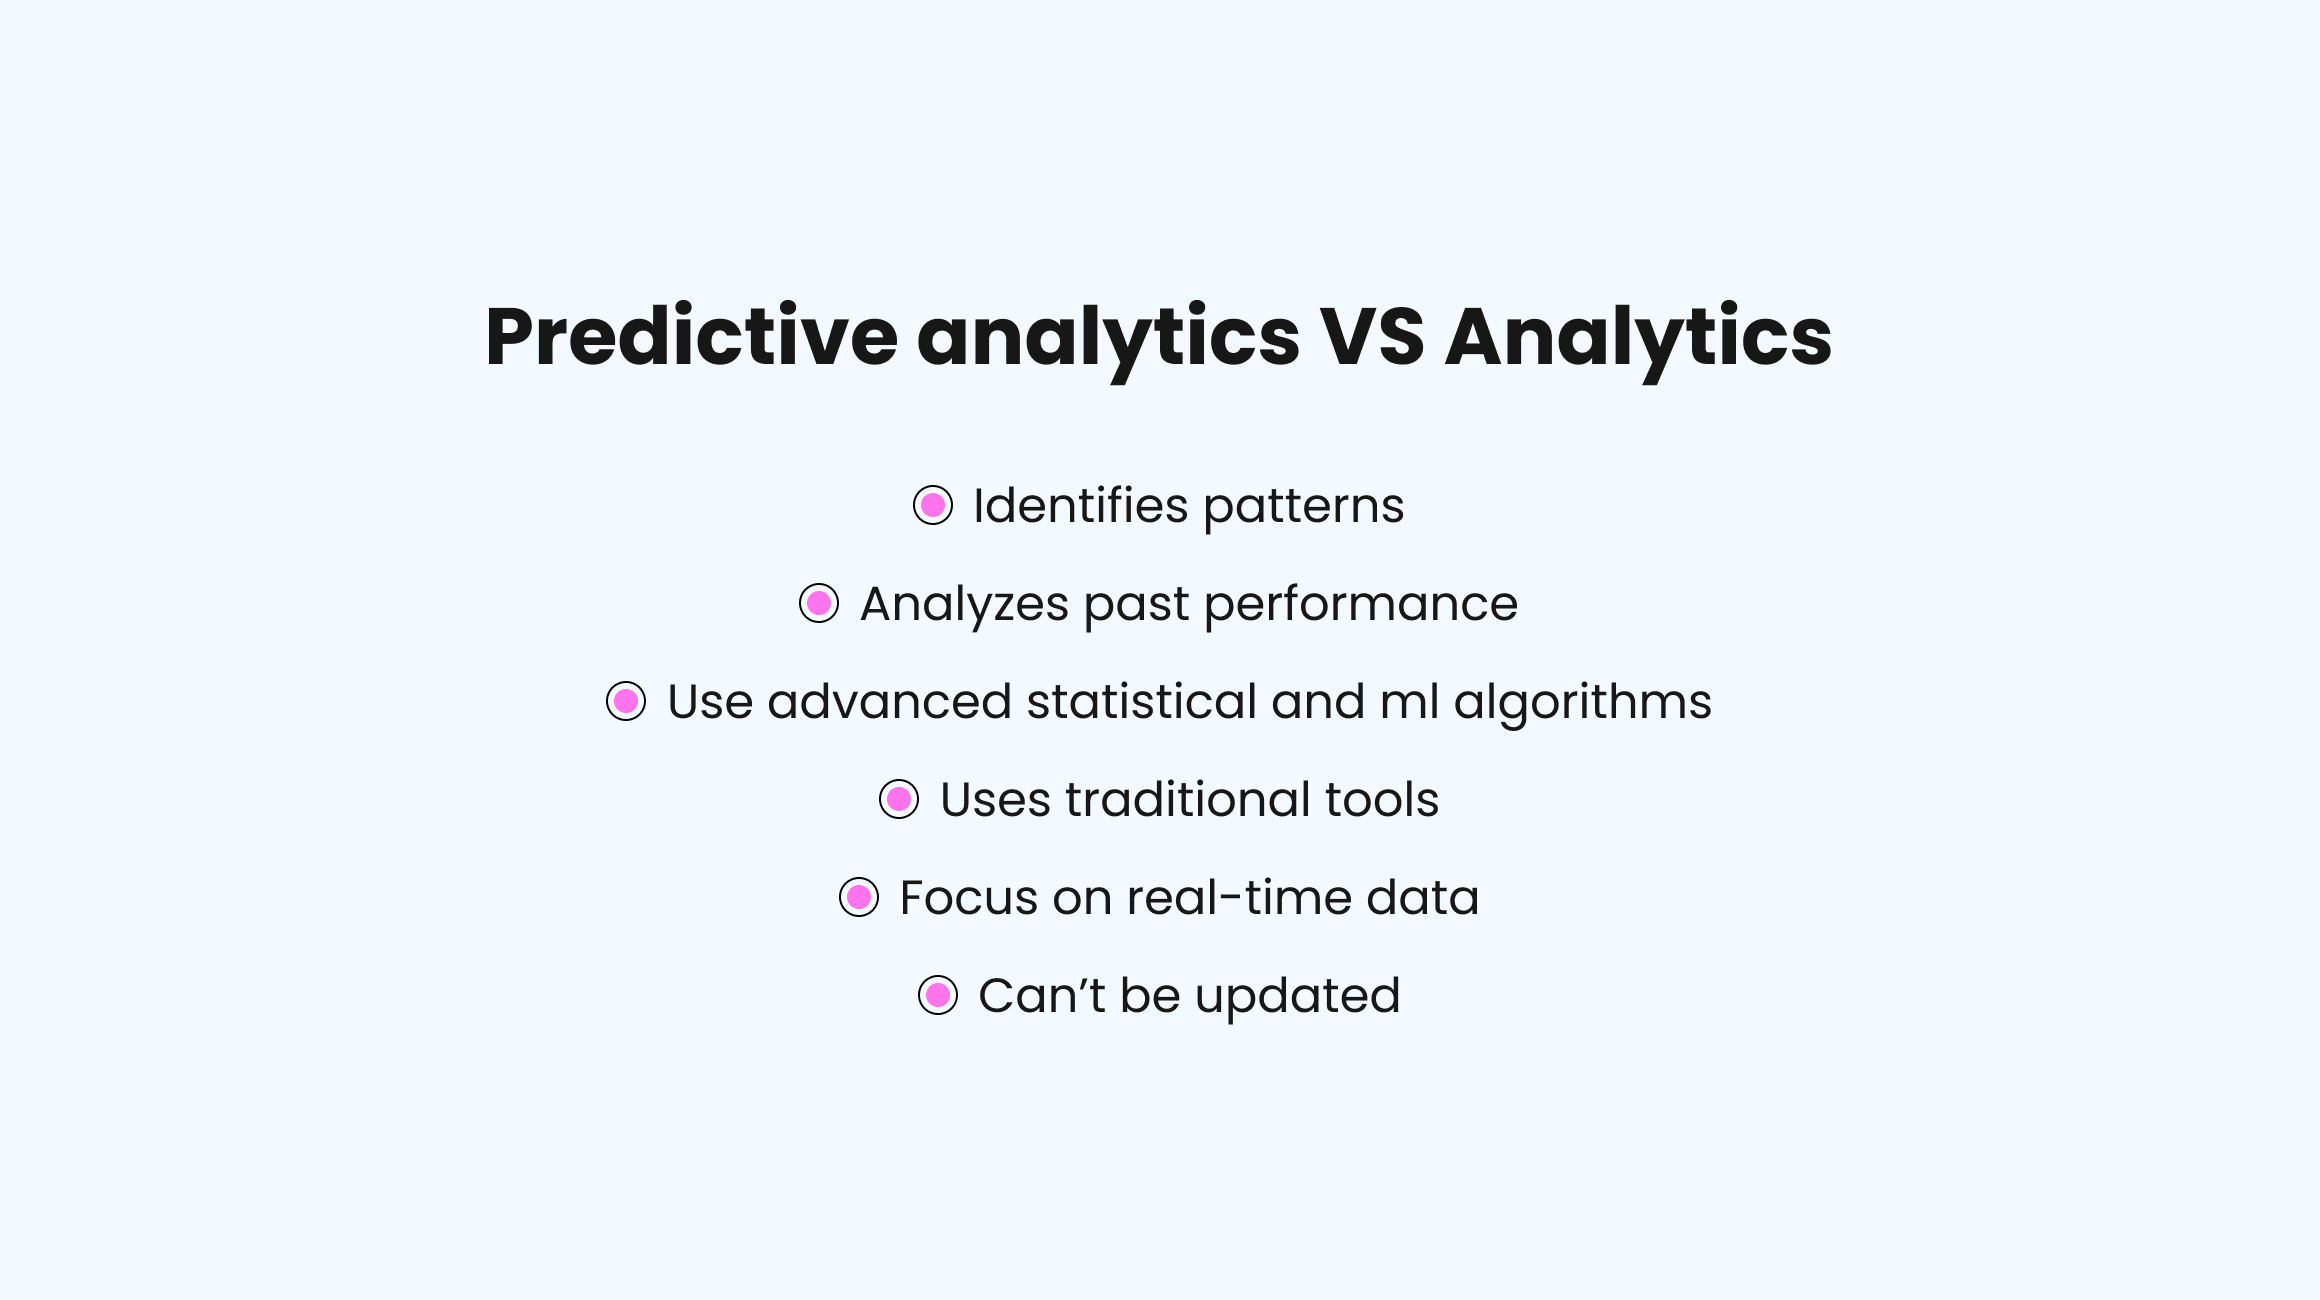 How predictive analytics differs from traditional analytics